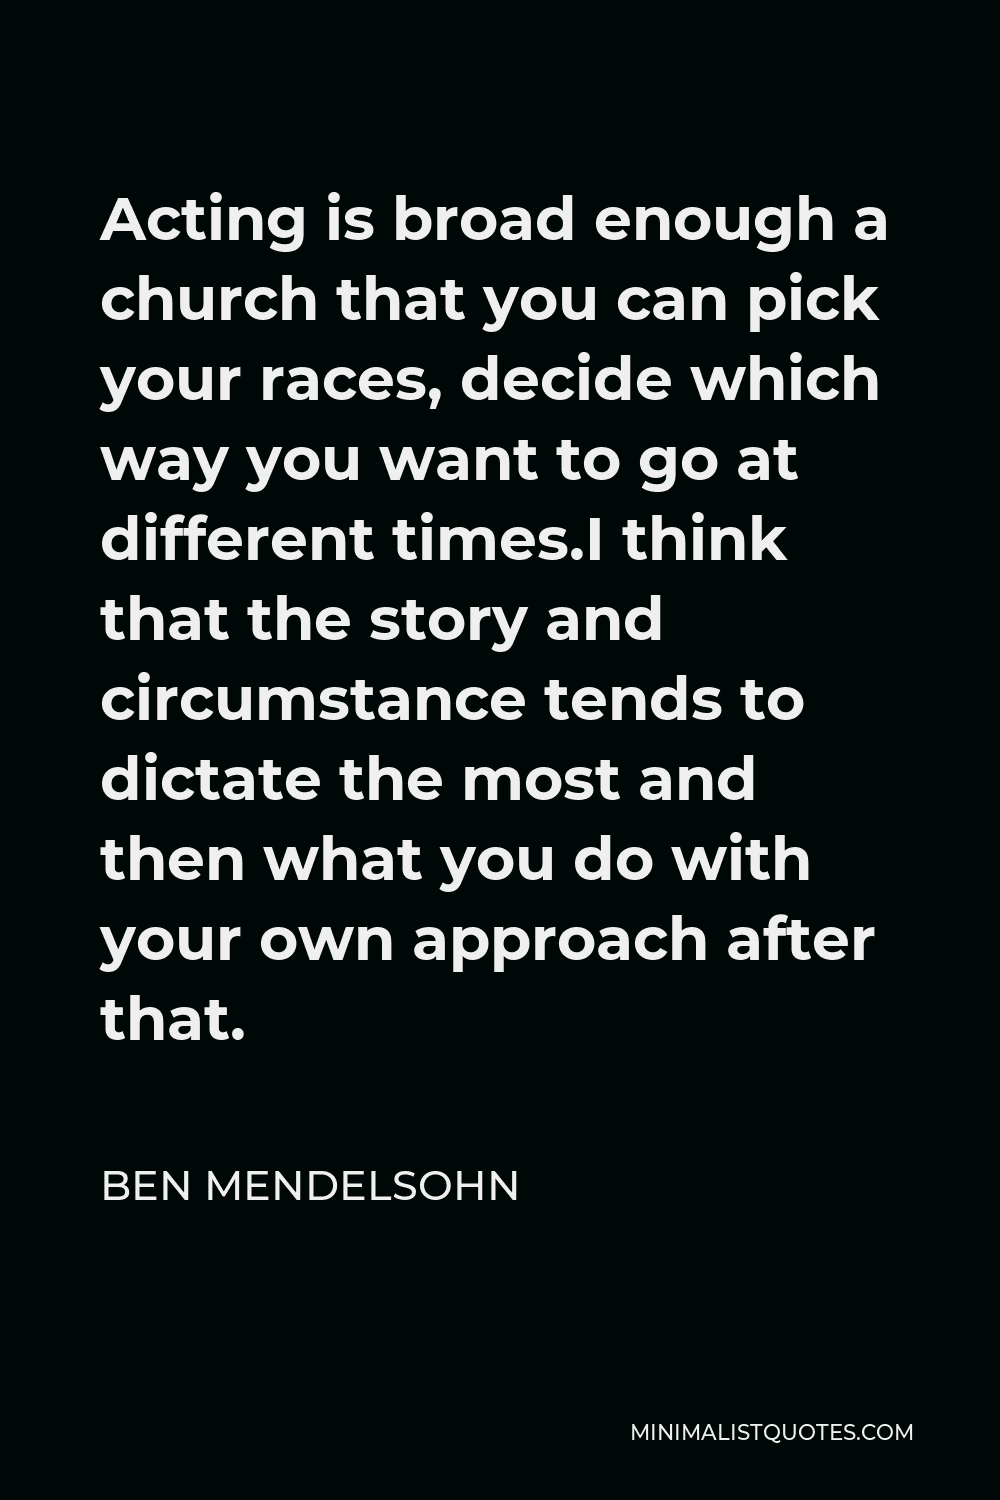 Ben Mendelsohn Quote - Acting is broad enough a church that you can pick your races, decide which way you want to go at different times.I think that the story and circumstance tends to dictate the most and then what you do with your own approach after that.